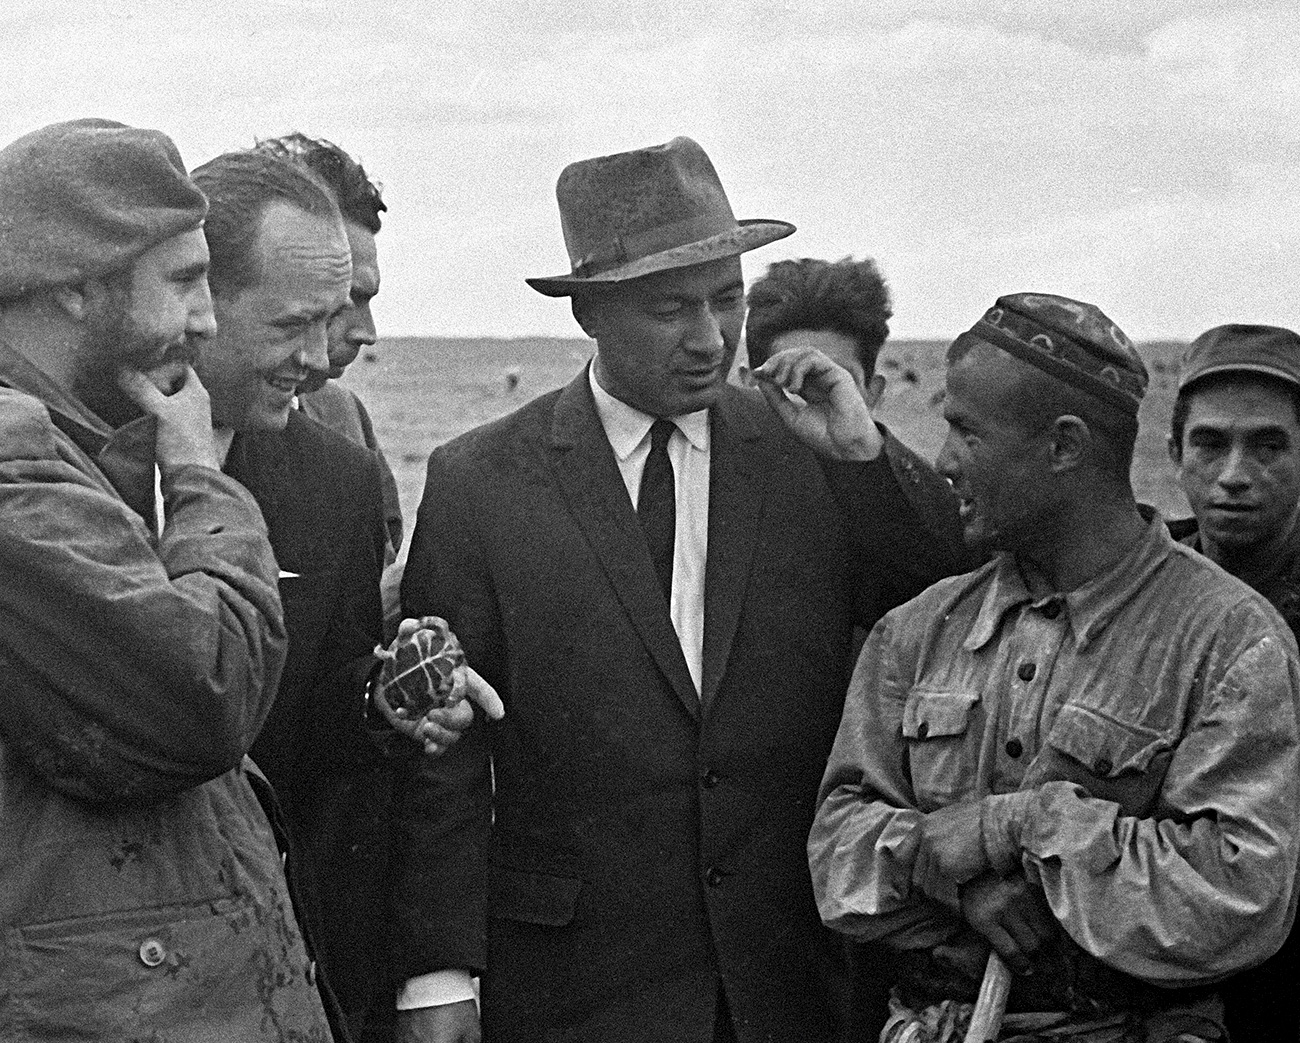 The entire scheme collapsed after the death of Leonid Brezhnev in 1982. Yuri Andropov then rose to power, who for many years had collected "kompromat" (compromising evidence) implicating the Uzbek authorities. // Fidel Castro (L) and First Secretary of Uzbekistan's Communist Party Sharof Rashidov (2nd R) and a shepherd at the Sverdlov collective-farm, 1963